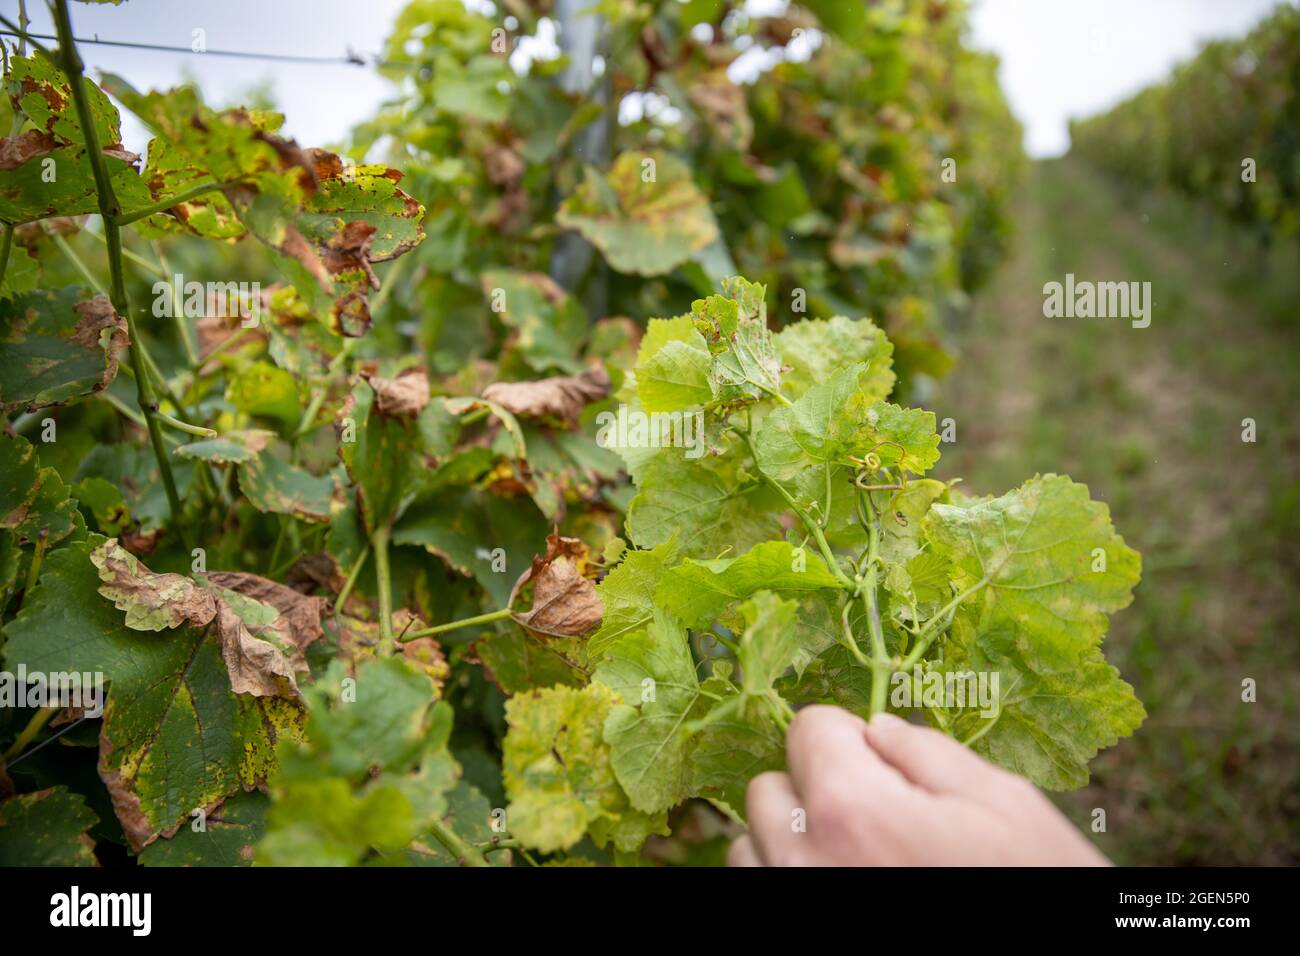 Randersacker, Germany. 19th Aug, 2021. Beate Leopold, managing director of Weinbauring Franken, shows the infestation of fungal spores of the so-called downy mildew (peronospora) on leaves of a vine. The fungal disease is threatening the grapes in some vineyards in Franconia. After the many rains in spring and summer, the fungus is a widespread problem throughout Germany, but also in other European countries. Credit: Daniel Karmann/dpa/Alamy Live News Stock Photo